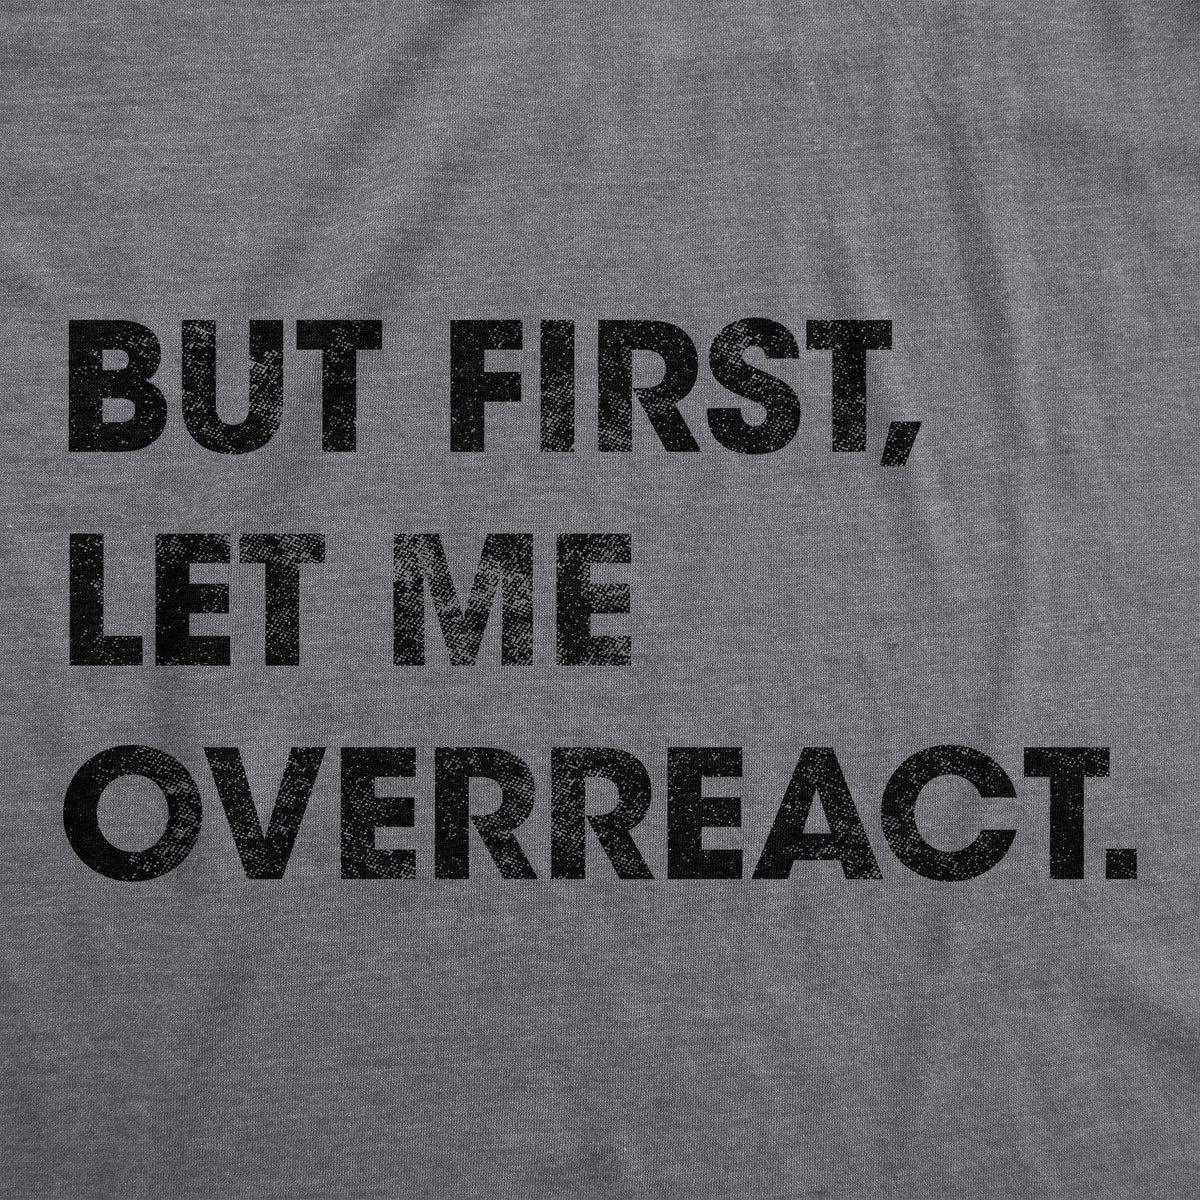 But First Let Me Overreact Men&#39;s Tshirt - Crazy Dog T-Shirts